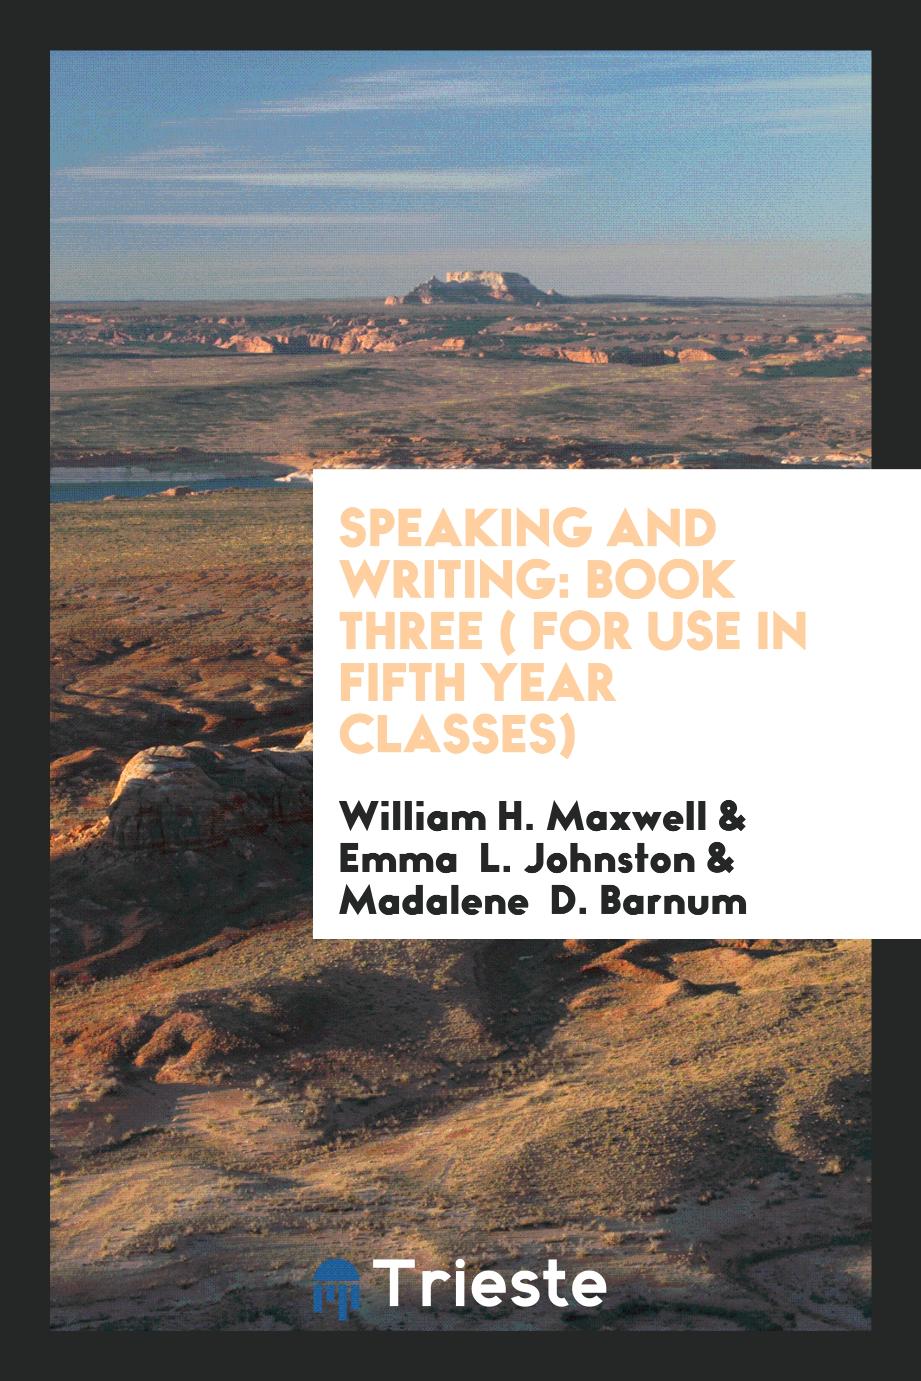 Speaking and Writing: Book Three ( for Use in Fifth Year Classes)